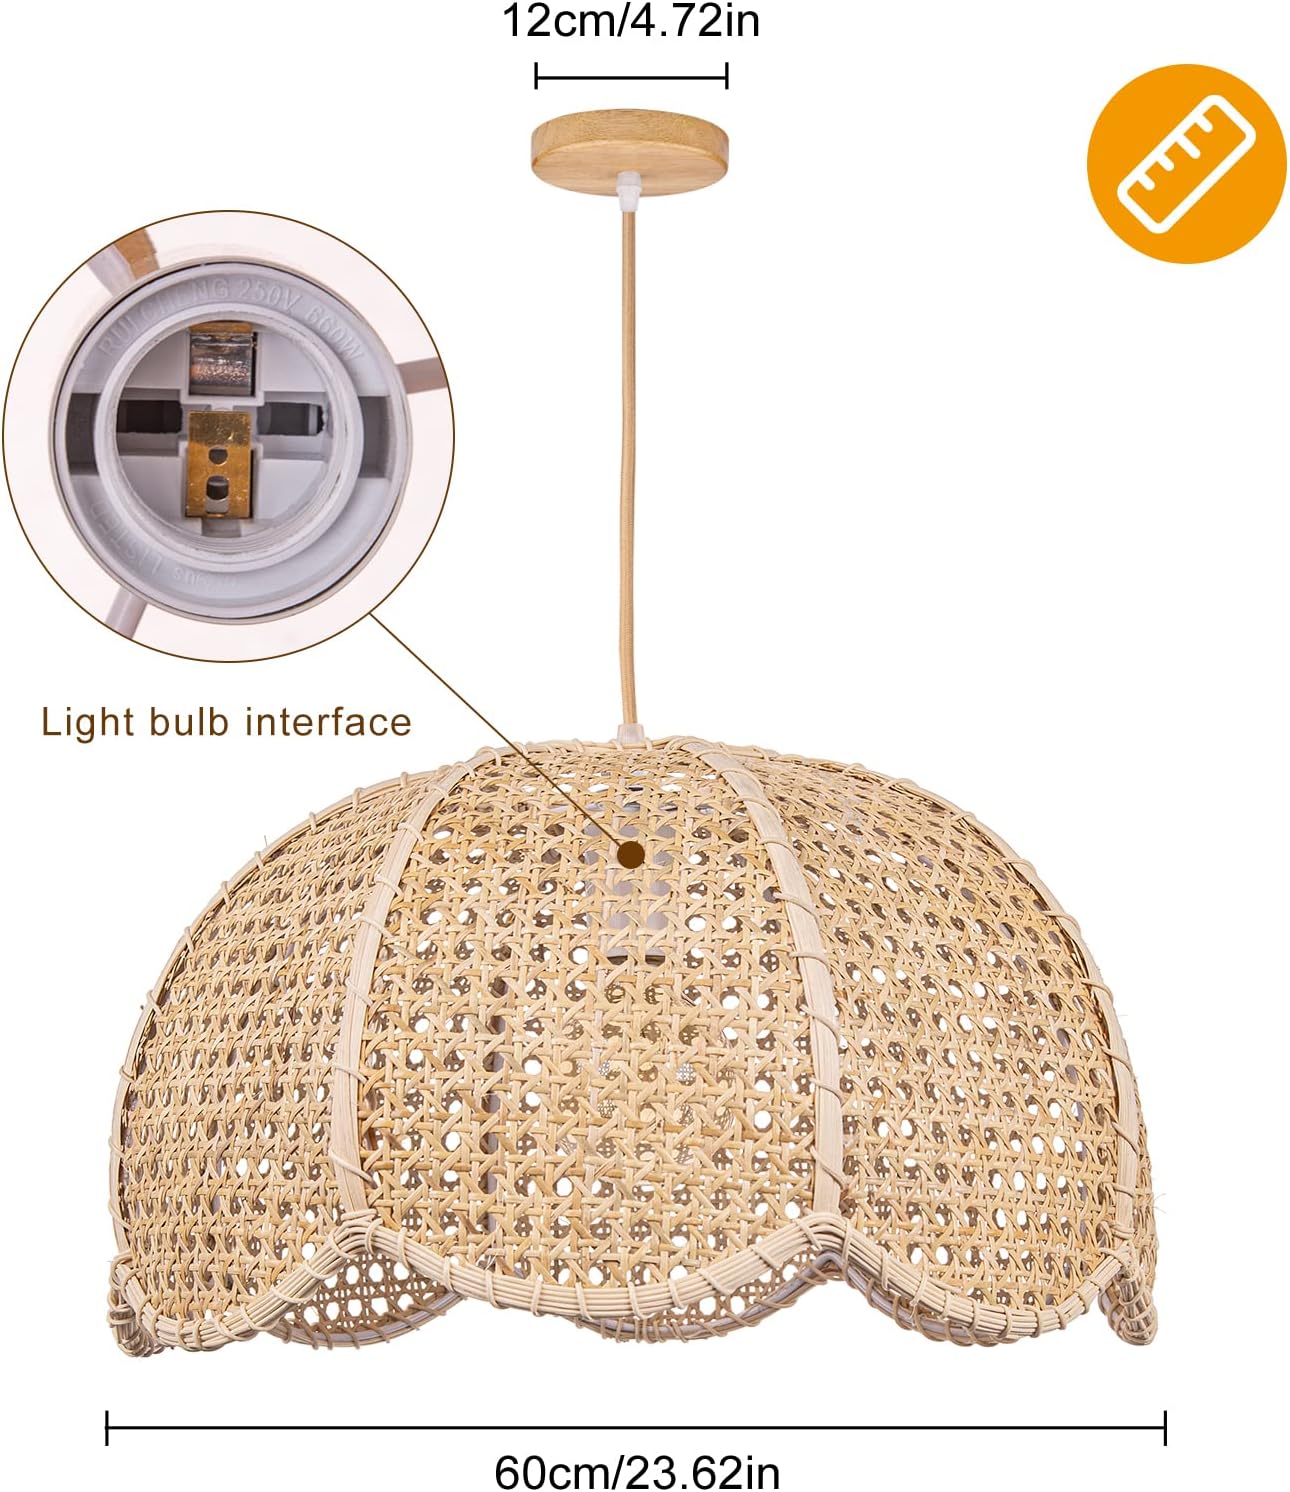 Arturesthome Rattan Woven Pendant Light, Hand-Woven Flower Shaped Ceiling Chandelier, Handmade Hanging Lamp Shade Crafts Lampshade for Dining Room Bar Café Rustic Décor